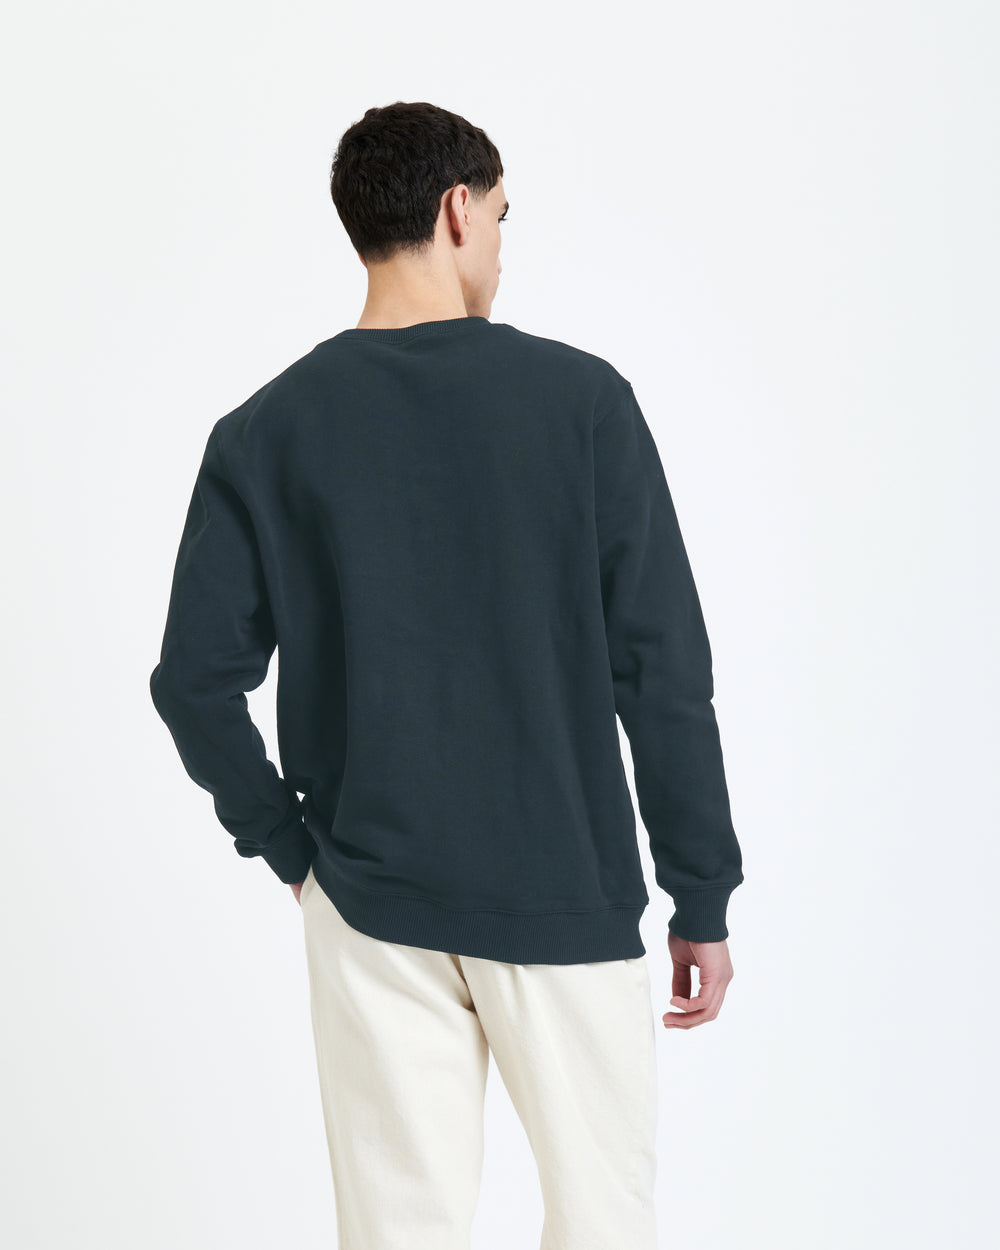 New Optimist menswear Ulivo (without cut) Crewneck